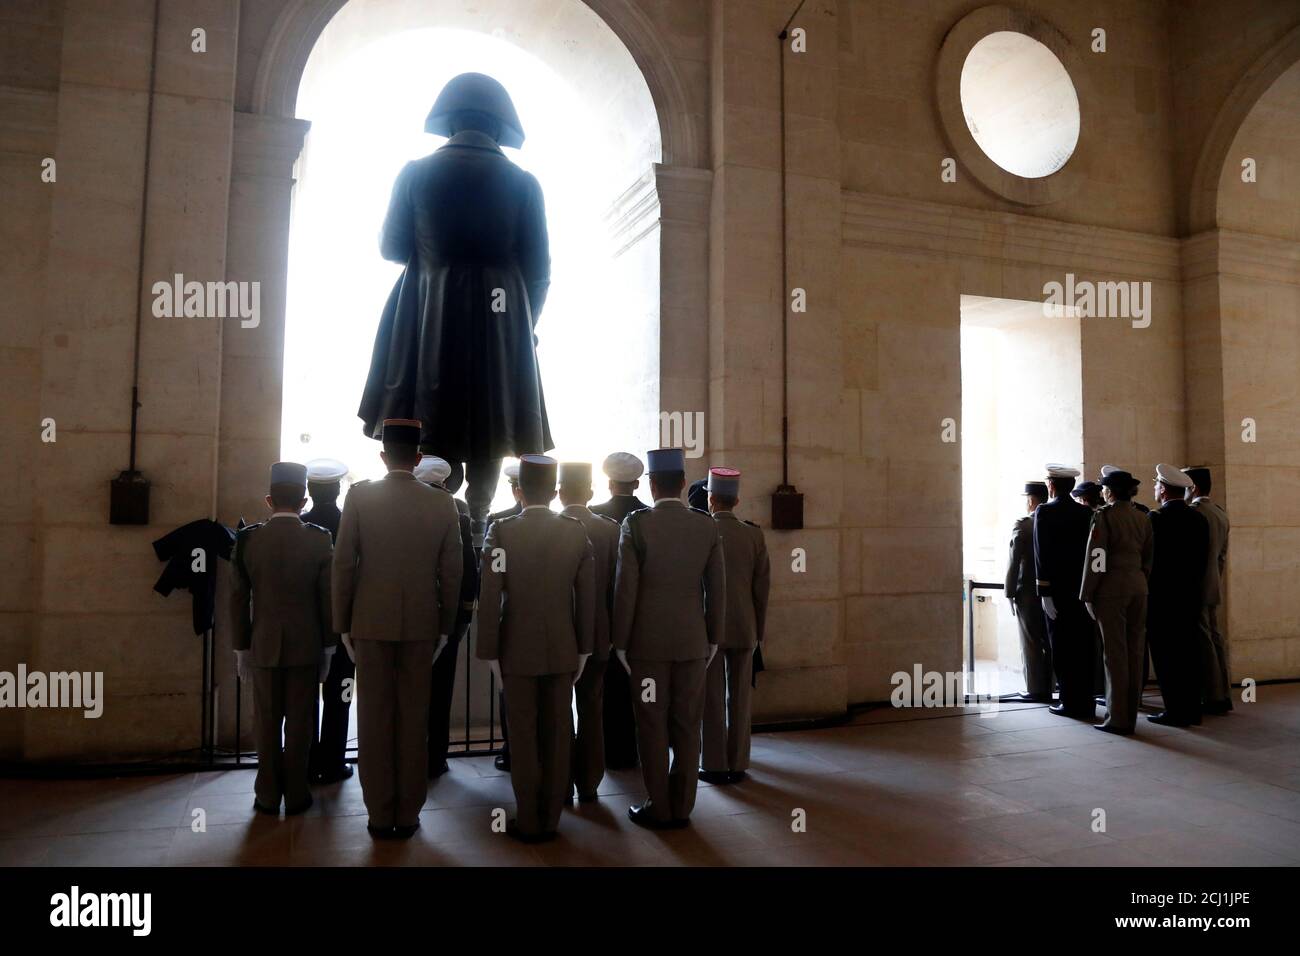 French soldiers attend a national ceremony for the thirteen French soldiers killed in Mali, at the Hotel National des Invalides in Paris, France, December 2, 2019. French soldiers Julien Carrette, Benjamin Gireud, Romain Salles de Saint-Paul, Clement Frison-Roche, Nicolas Megard, Romain Chomel de Jarnieu, Pierre Bockel, Alex Morisse, Jeremy Leusie, Alexandre Protin, Antoine Serre, Valentin Duval, Andrei Jouk died in Mali when their helicopters collided in the dark last week as they hunted for Islamist militants.  REUTERS/Charles Platiau Stock Photo